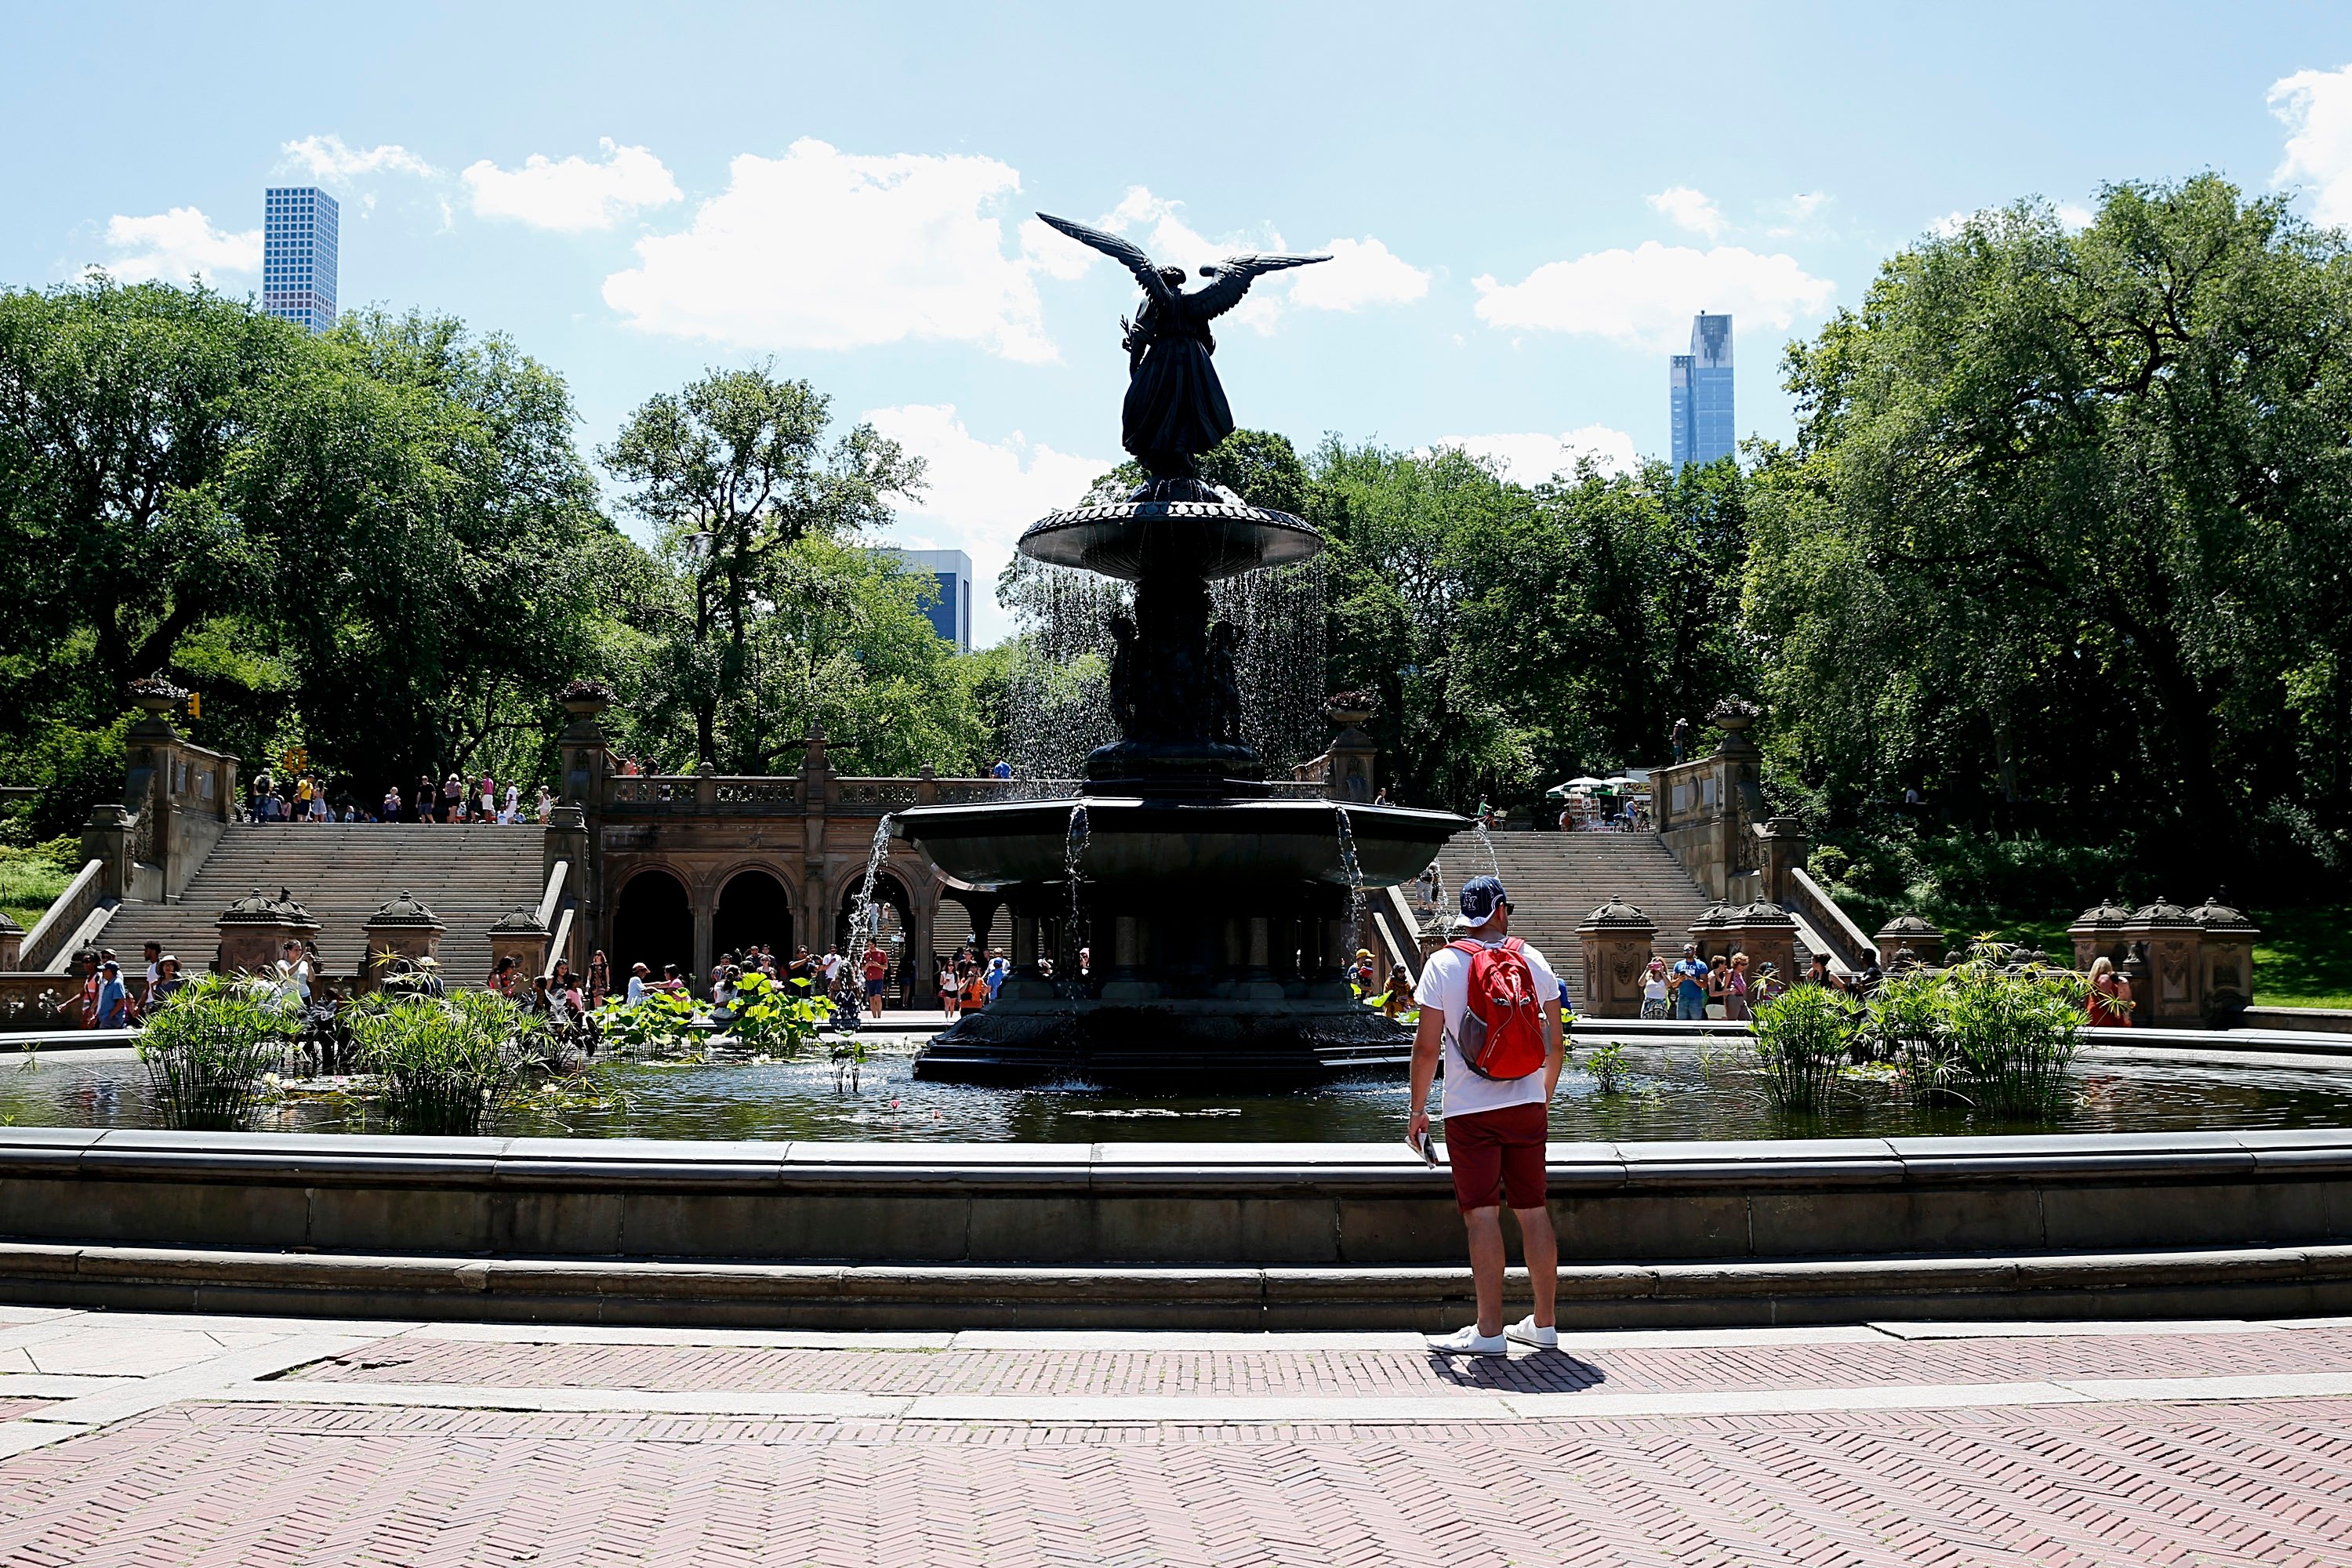 Bethesda Fountain in Central Park on July 31, 2015. The fountain and Terrace were used one of many And Just Like That... filming locationa 